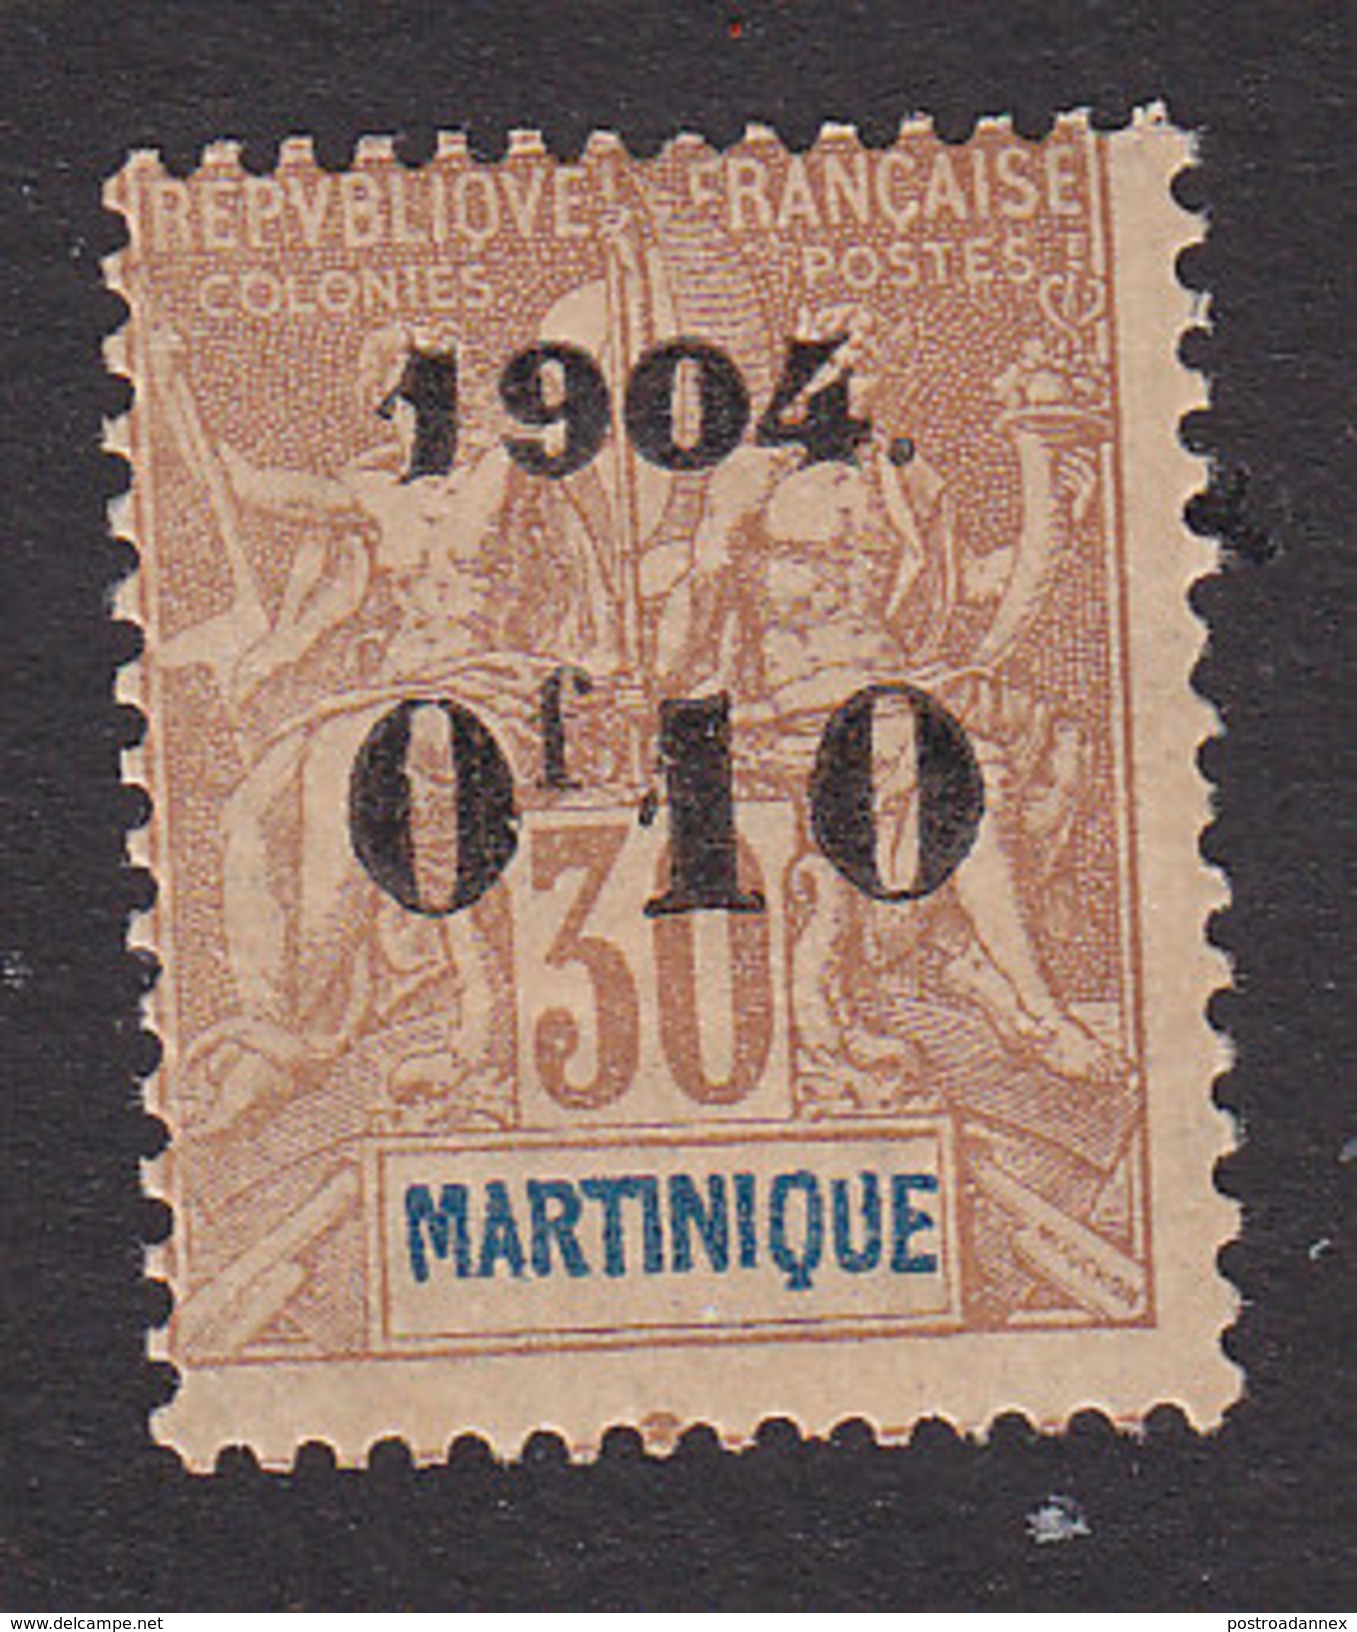 Martinique, Scott #56, Mint Hinged, Navigation And Commerce Surcharged, Issued 1904 - Unused Stamps